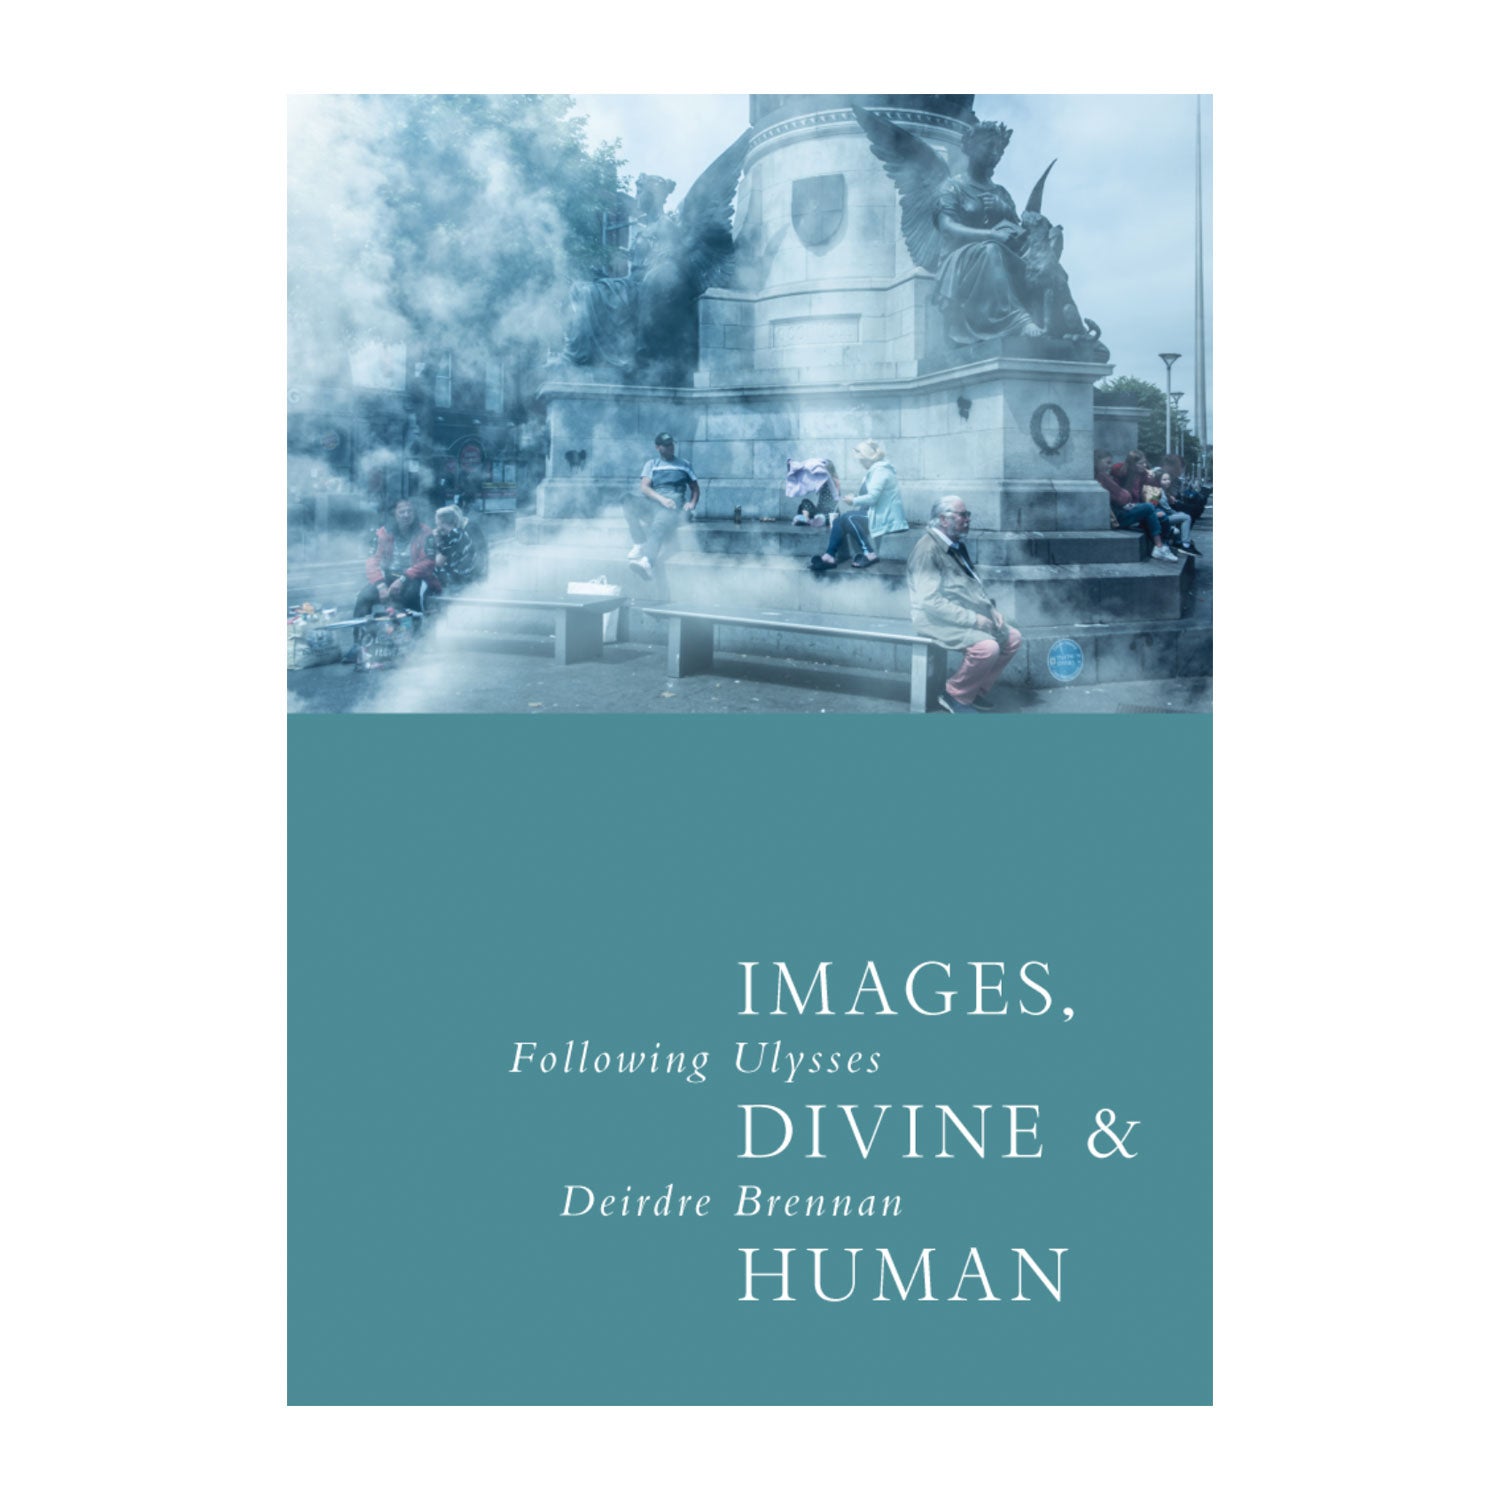 IMAGES, DIVINE & HUMAN Following Ulysses by Deirdre Brennan. Photo Album of the Irish.